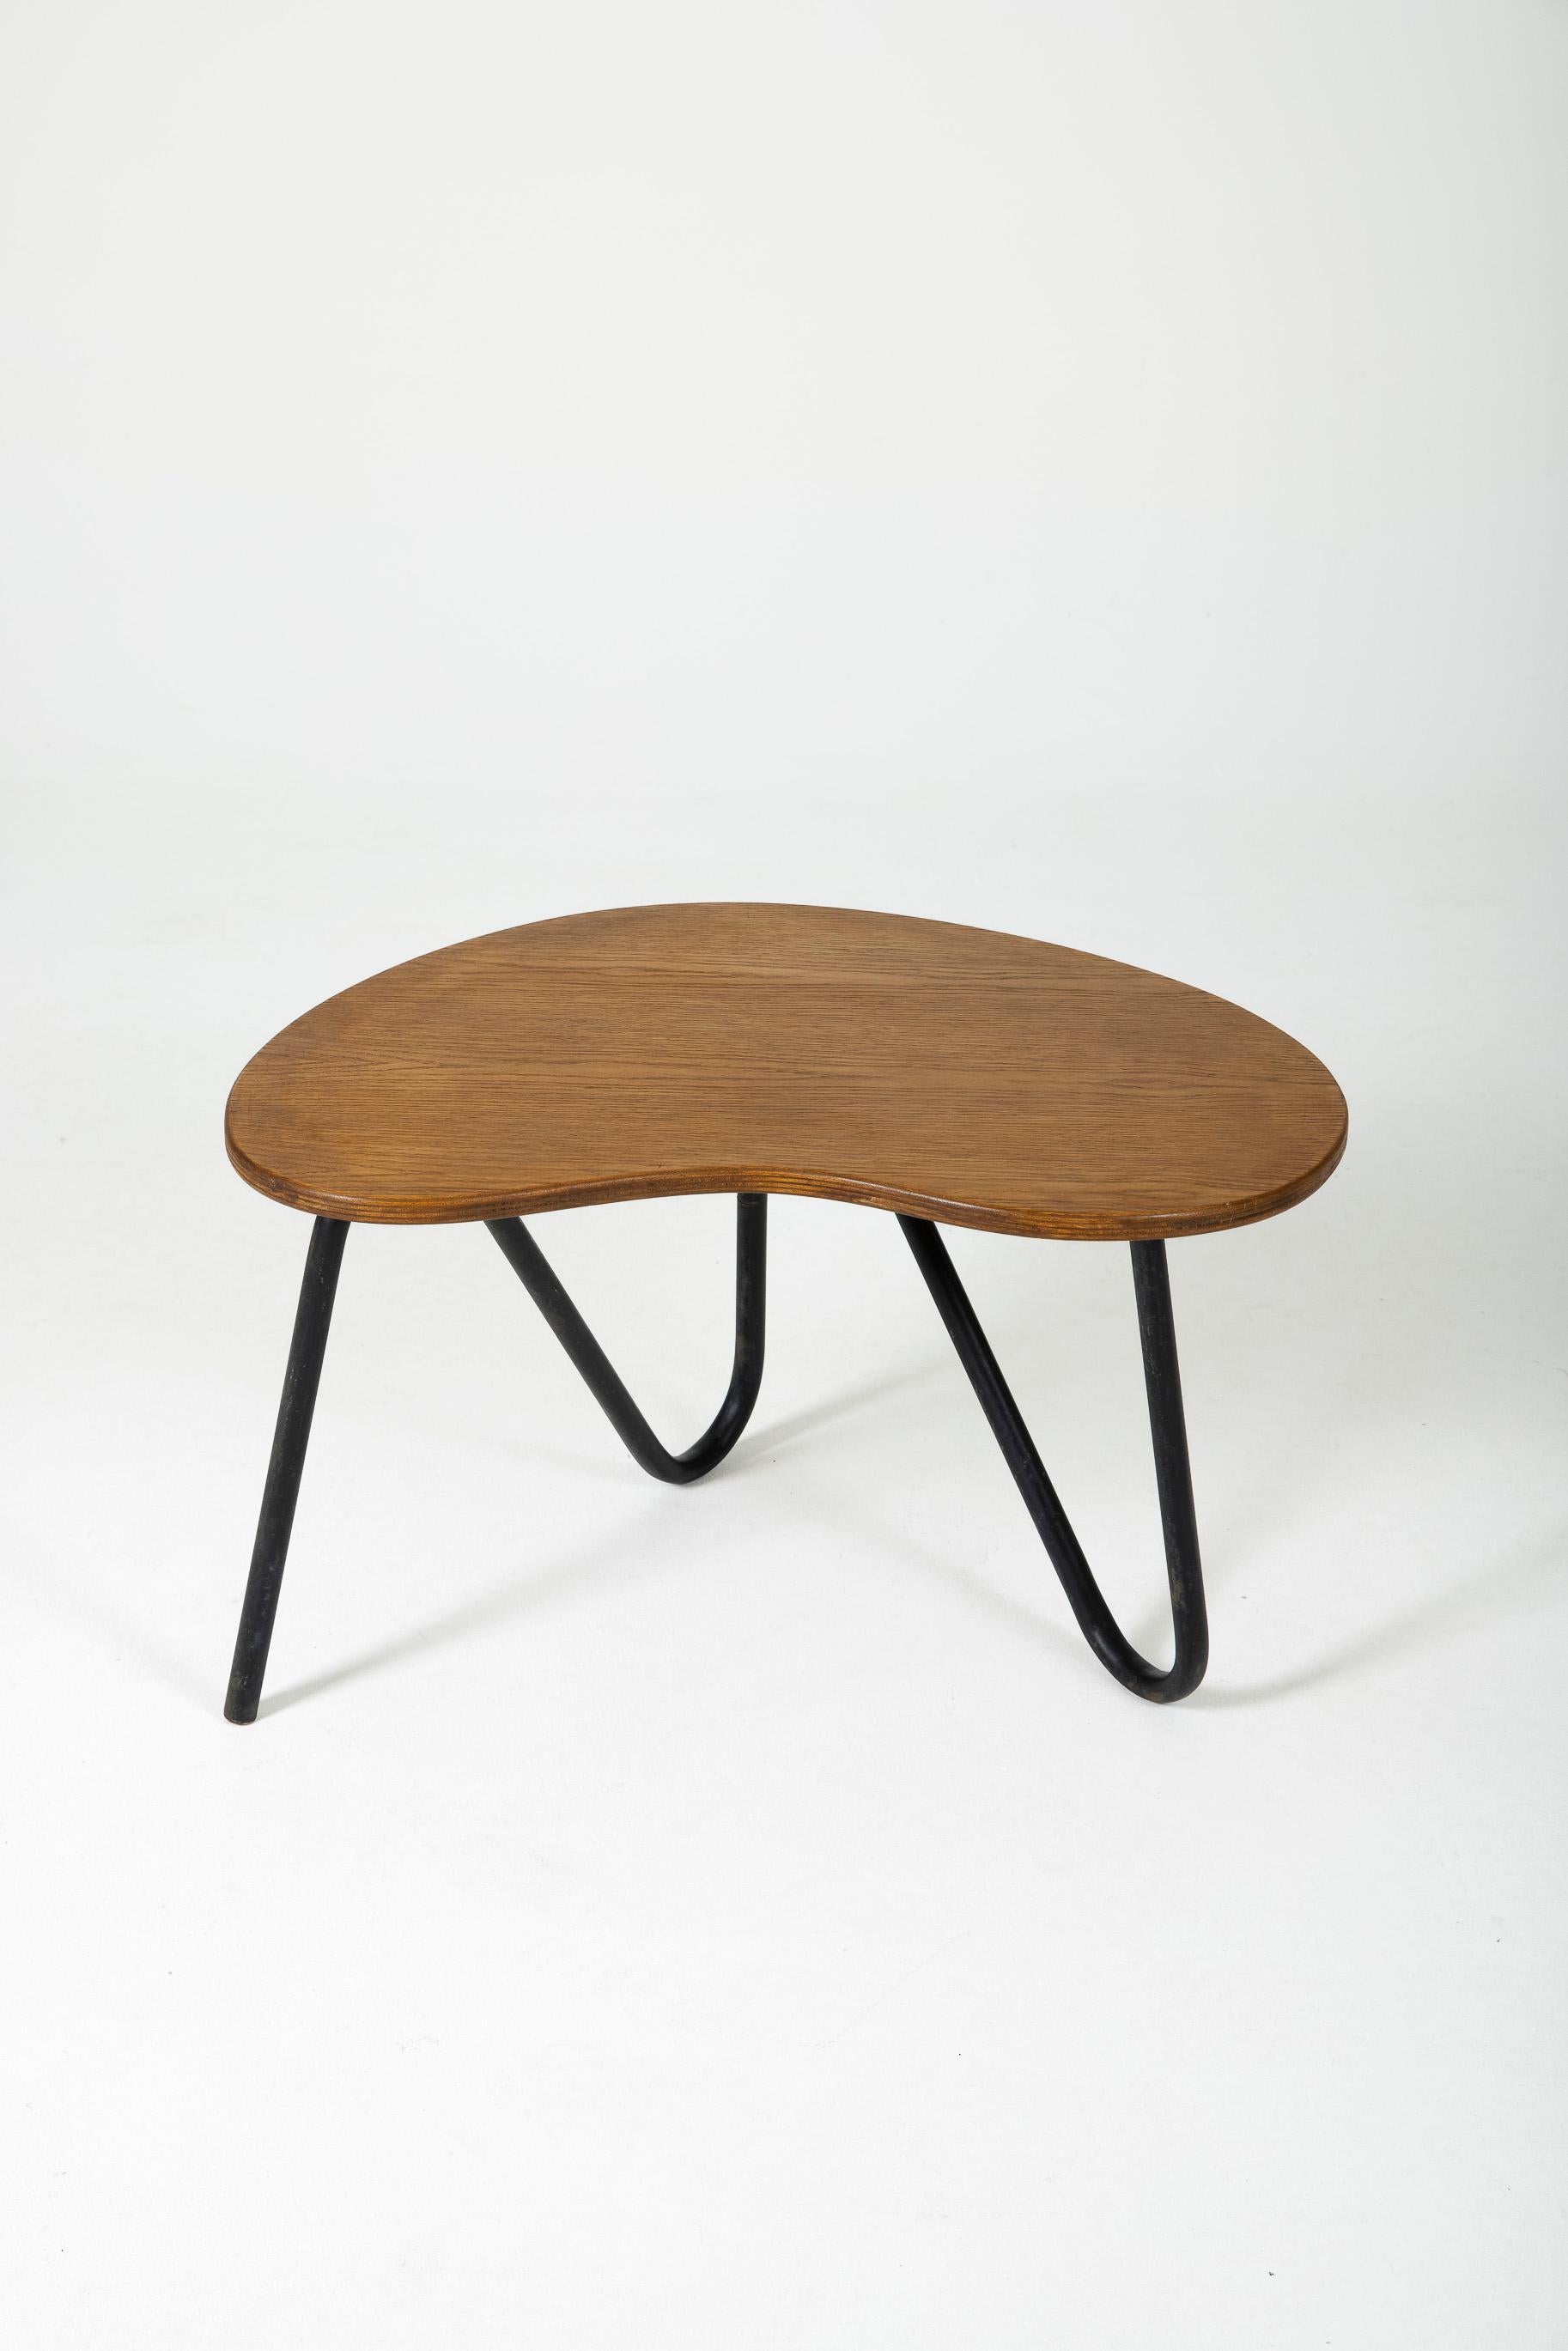 Coffee table in wood and metal, model 'Perfacto' by designer Pierre Guariche (1926–1995) in the 1950s (1957). Wooden tabletop, free-form black lacquered metal base. Pierre Guariche (1926–1995) was a renowned French designer and architect, active in